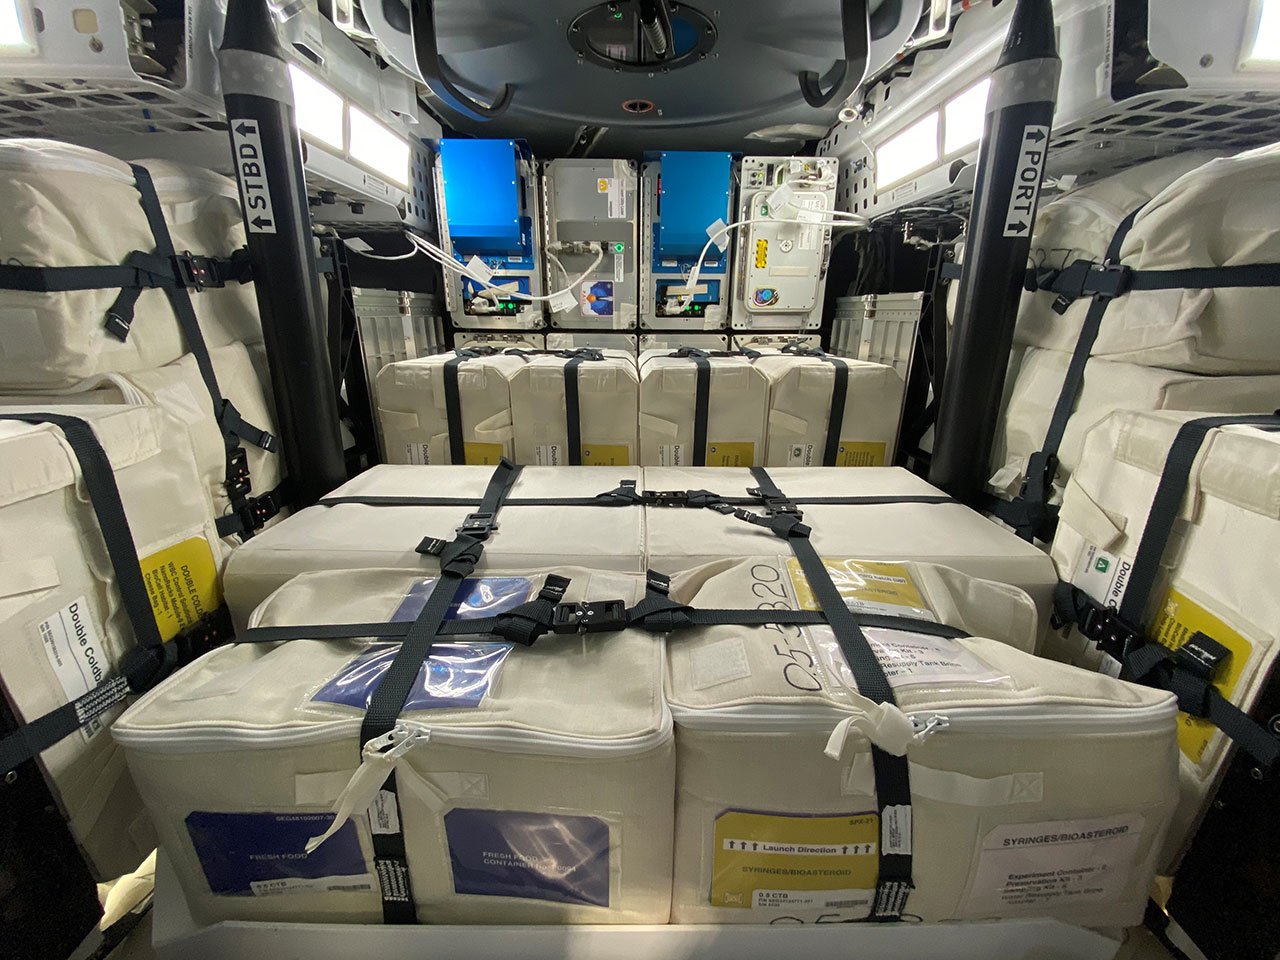 A look inside a SpaceX cargo Dragon spacecraft packed with cargo for the International Space Station. A Dragon could offer the down mass capability to bring back items for museum display.